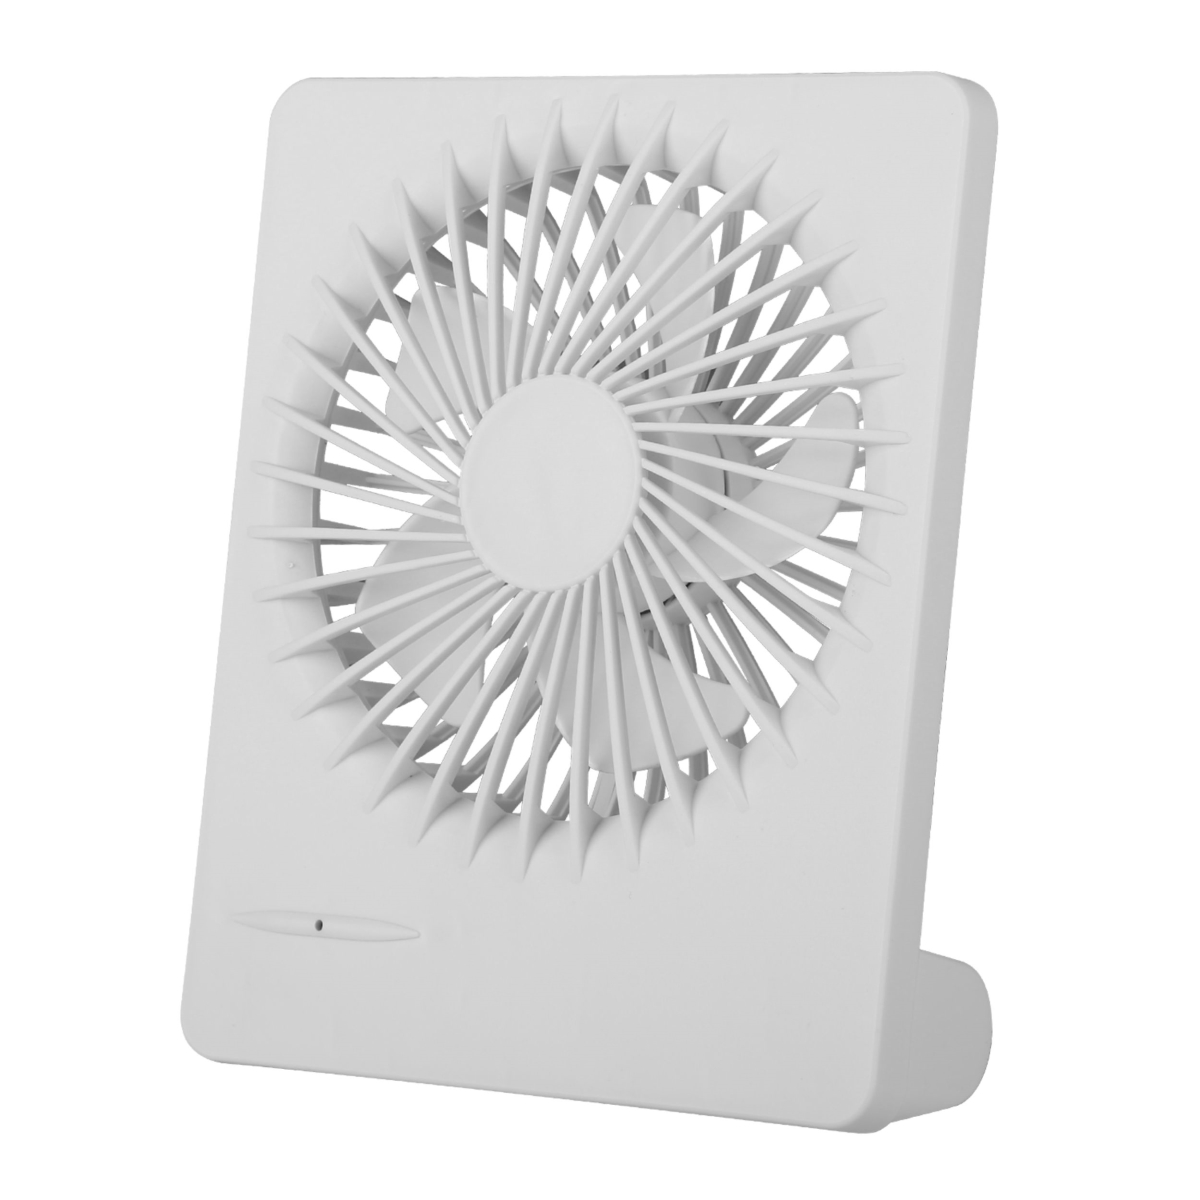 MakeITHappen USB Rechargeable Desk Fan - Quiet&#44; 5 Blades&#44; 3 Speeds - Perfect for Bedroom or Office